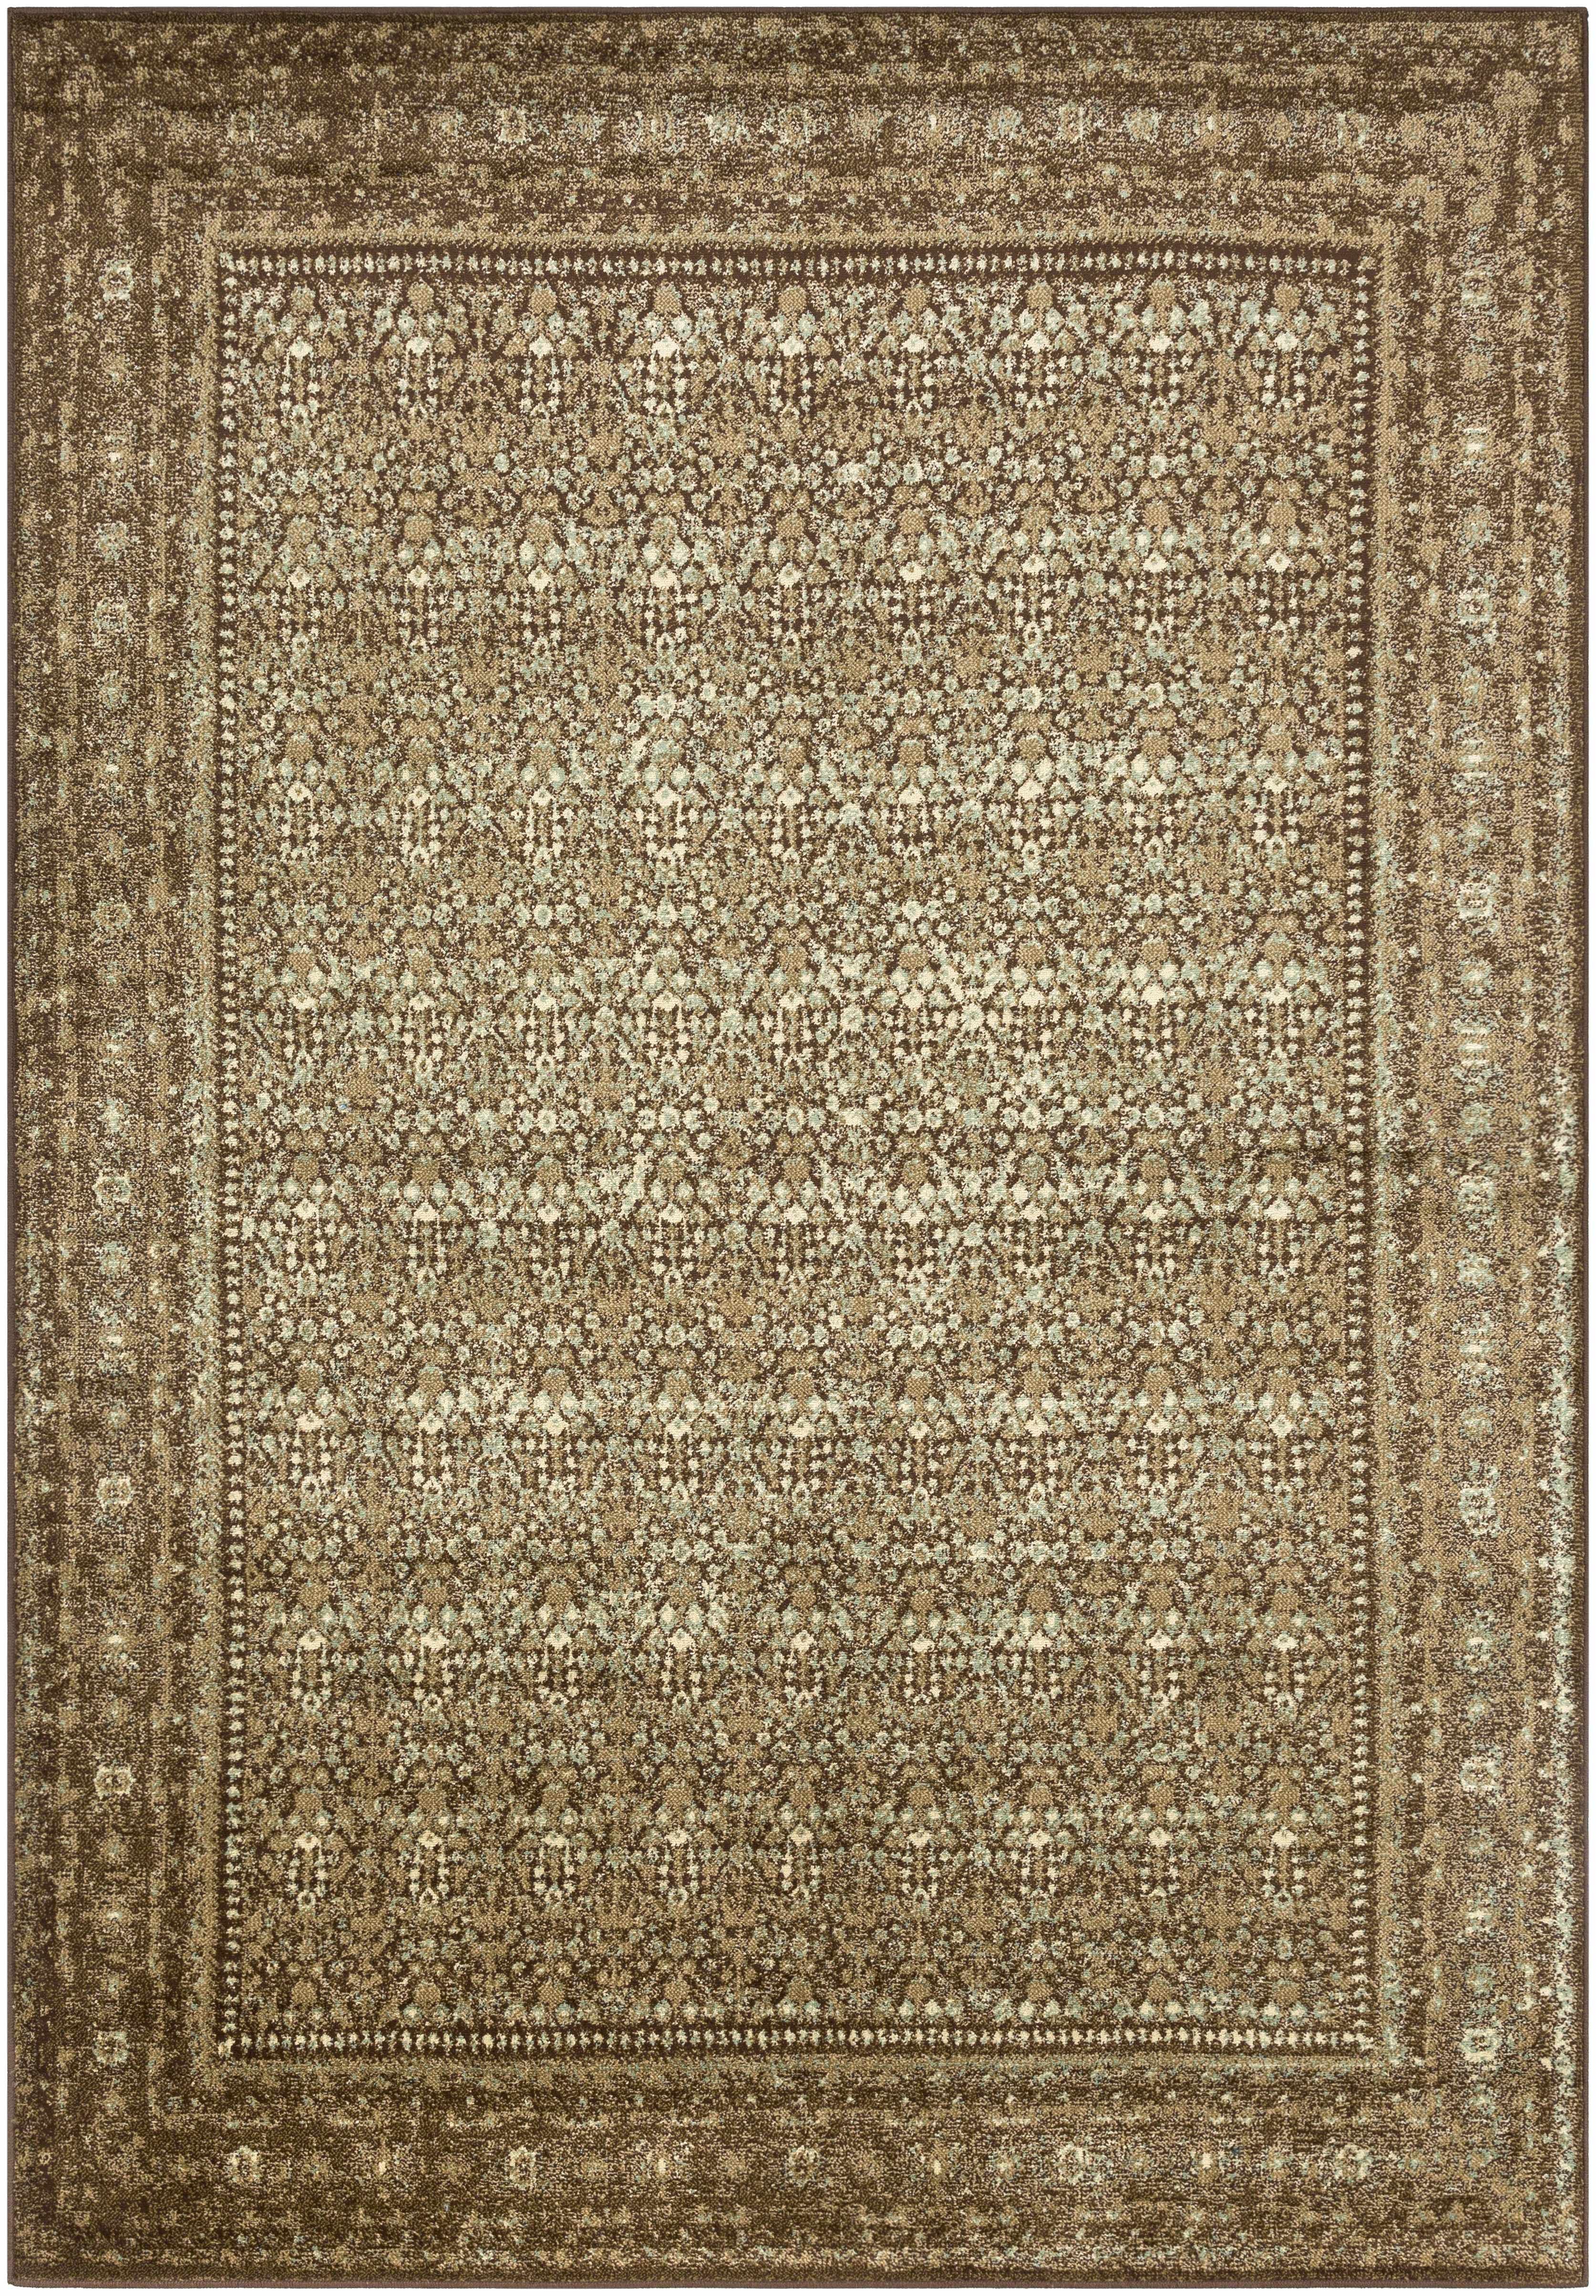 Parshall Area Rug | Boutique Rugs